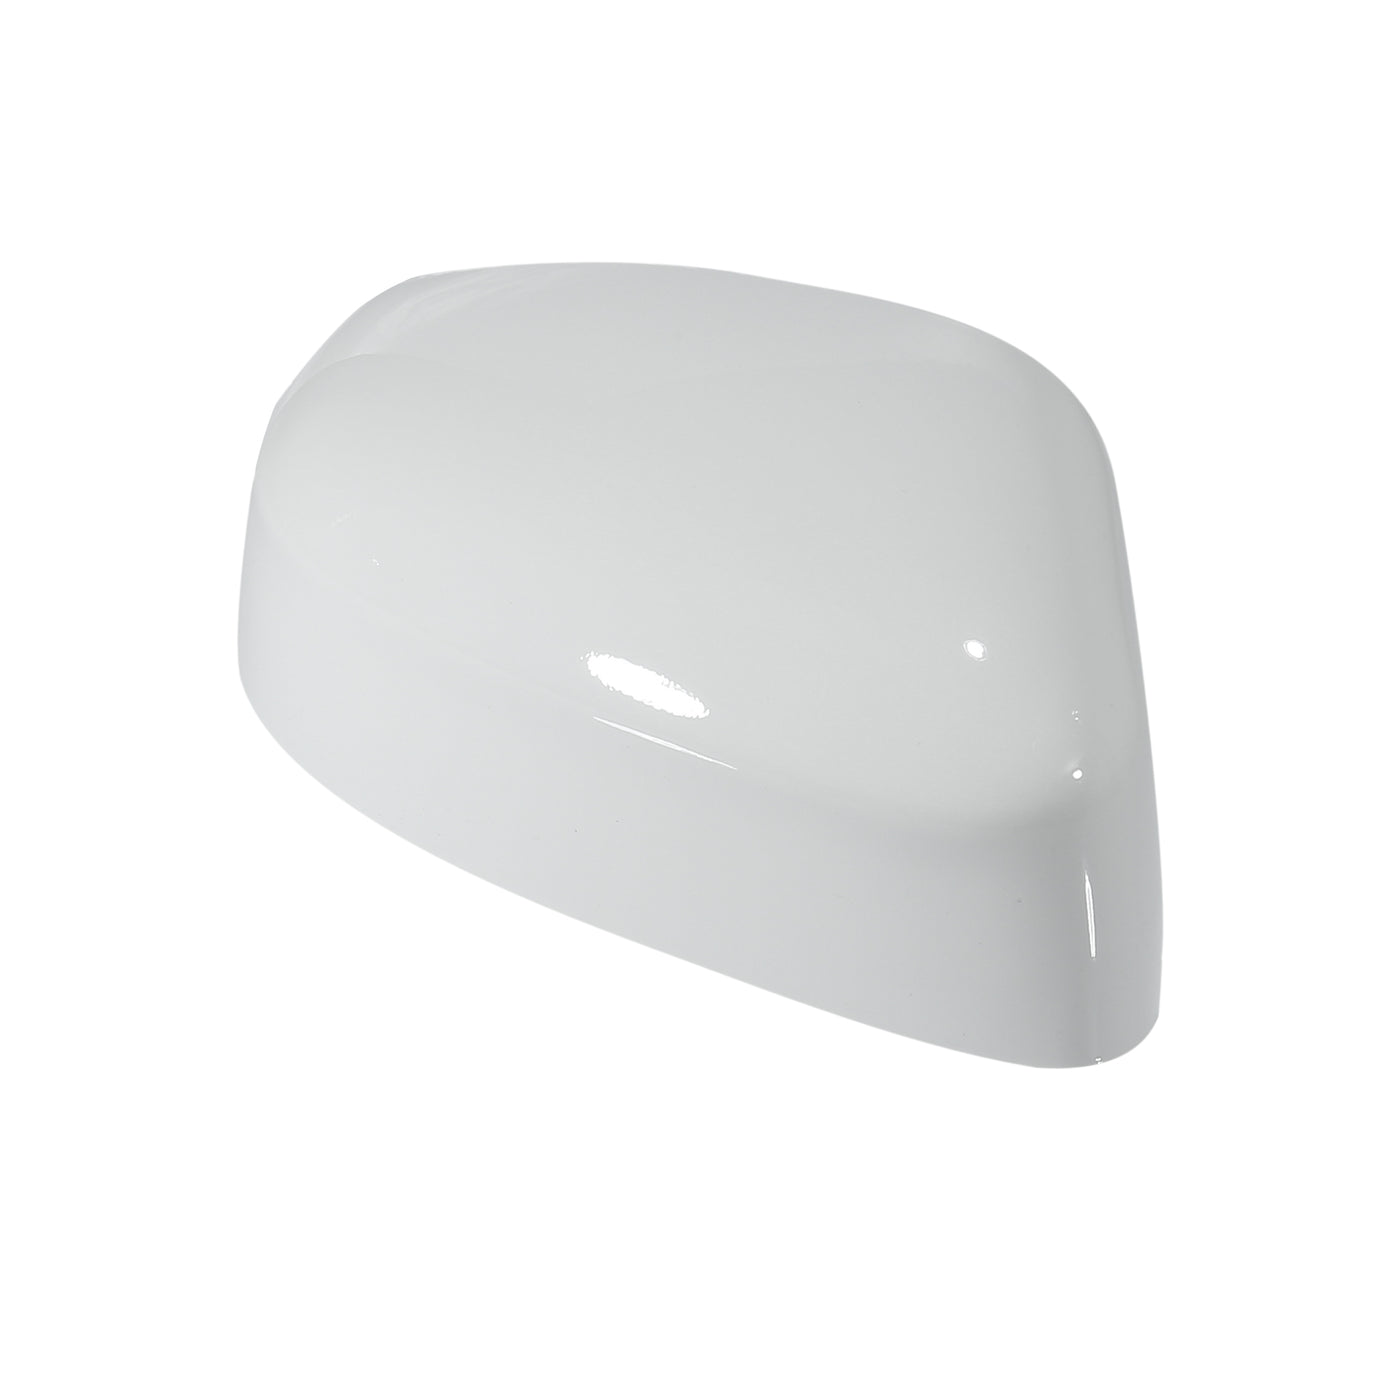 X AUTOHAUX White Right Side Car Side Door Wing Mirror Cover Rear View Mirror Cap for Ford Focus MK2 Facelift 2008-2011 for Ford Focus MK3 2013-2017